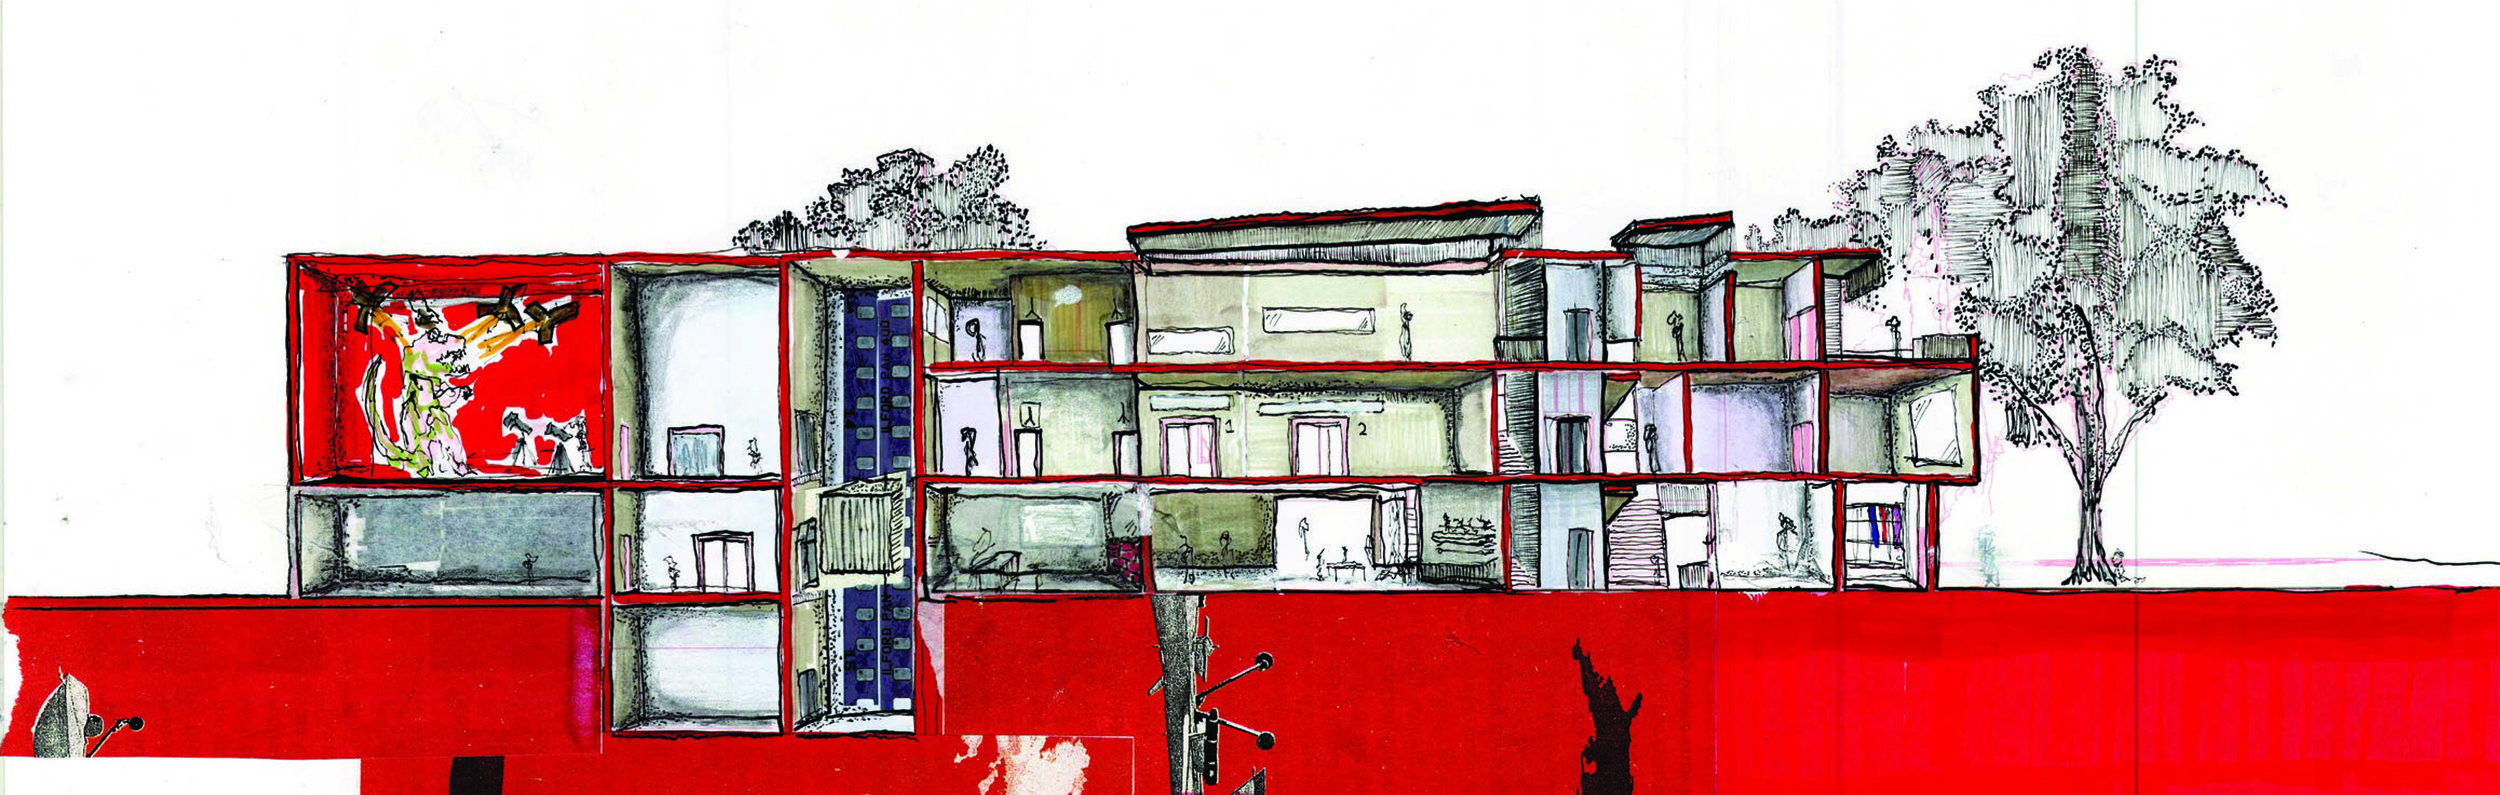 Perspective section II